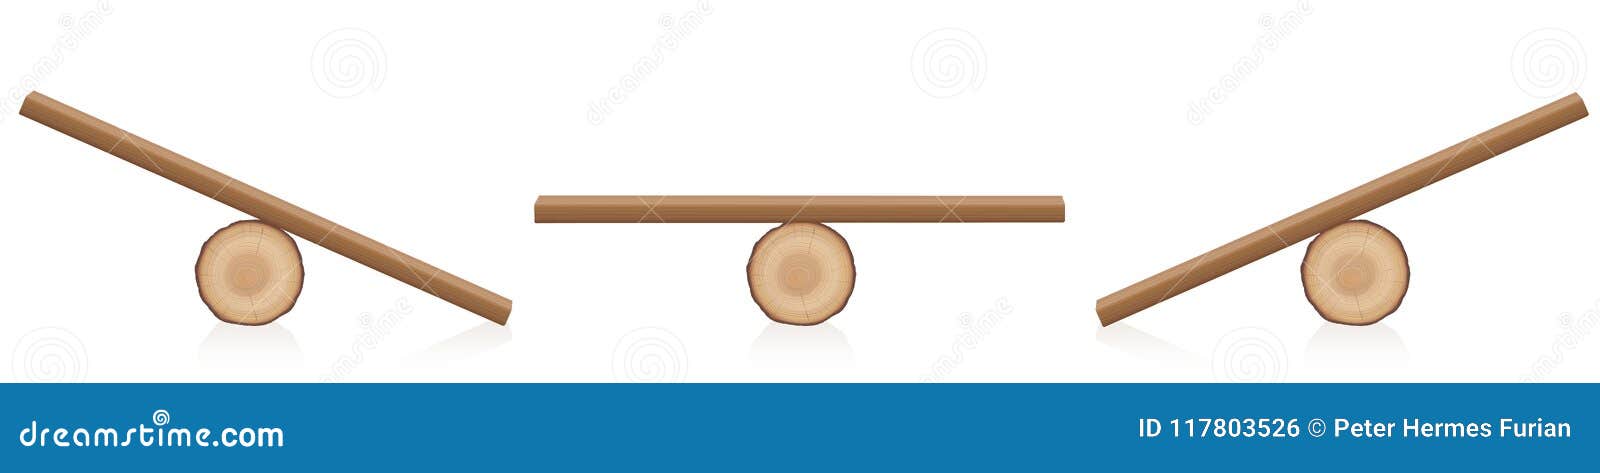 seesaw balance equal unequal weight wooden toy